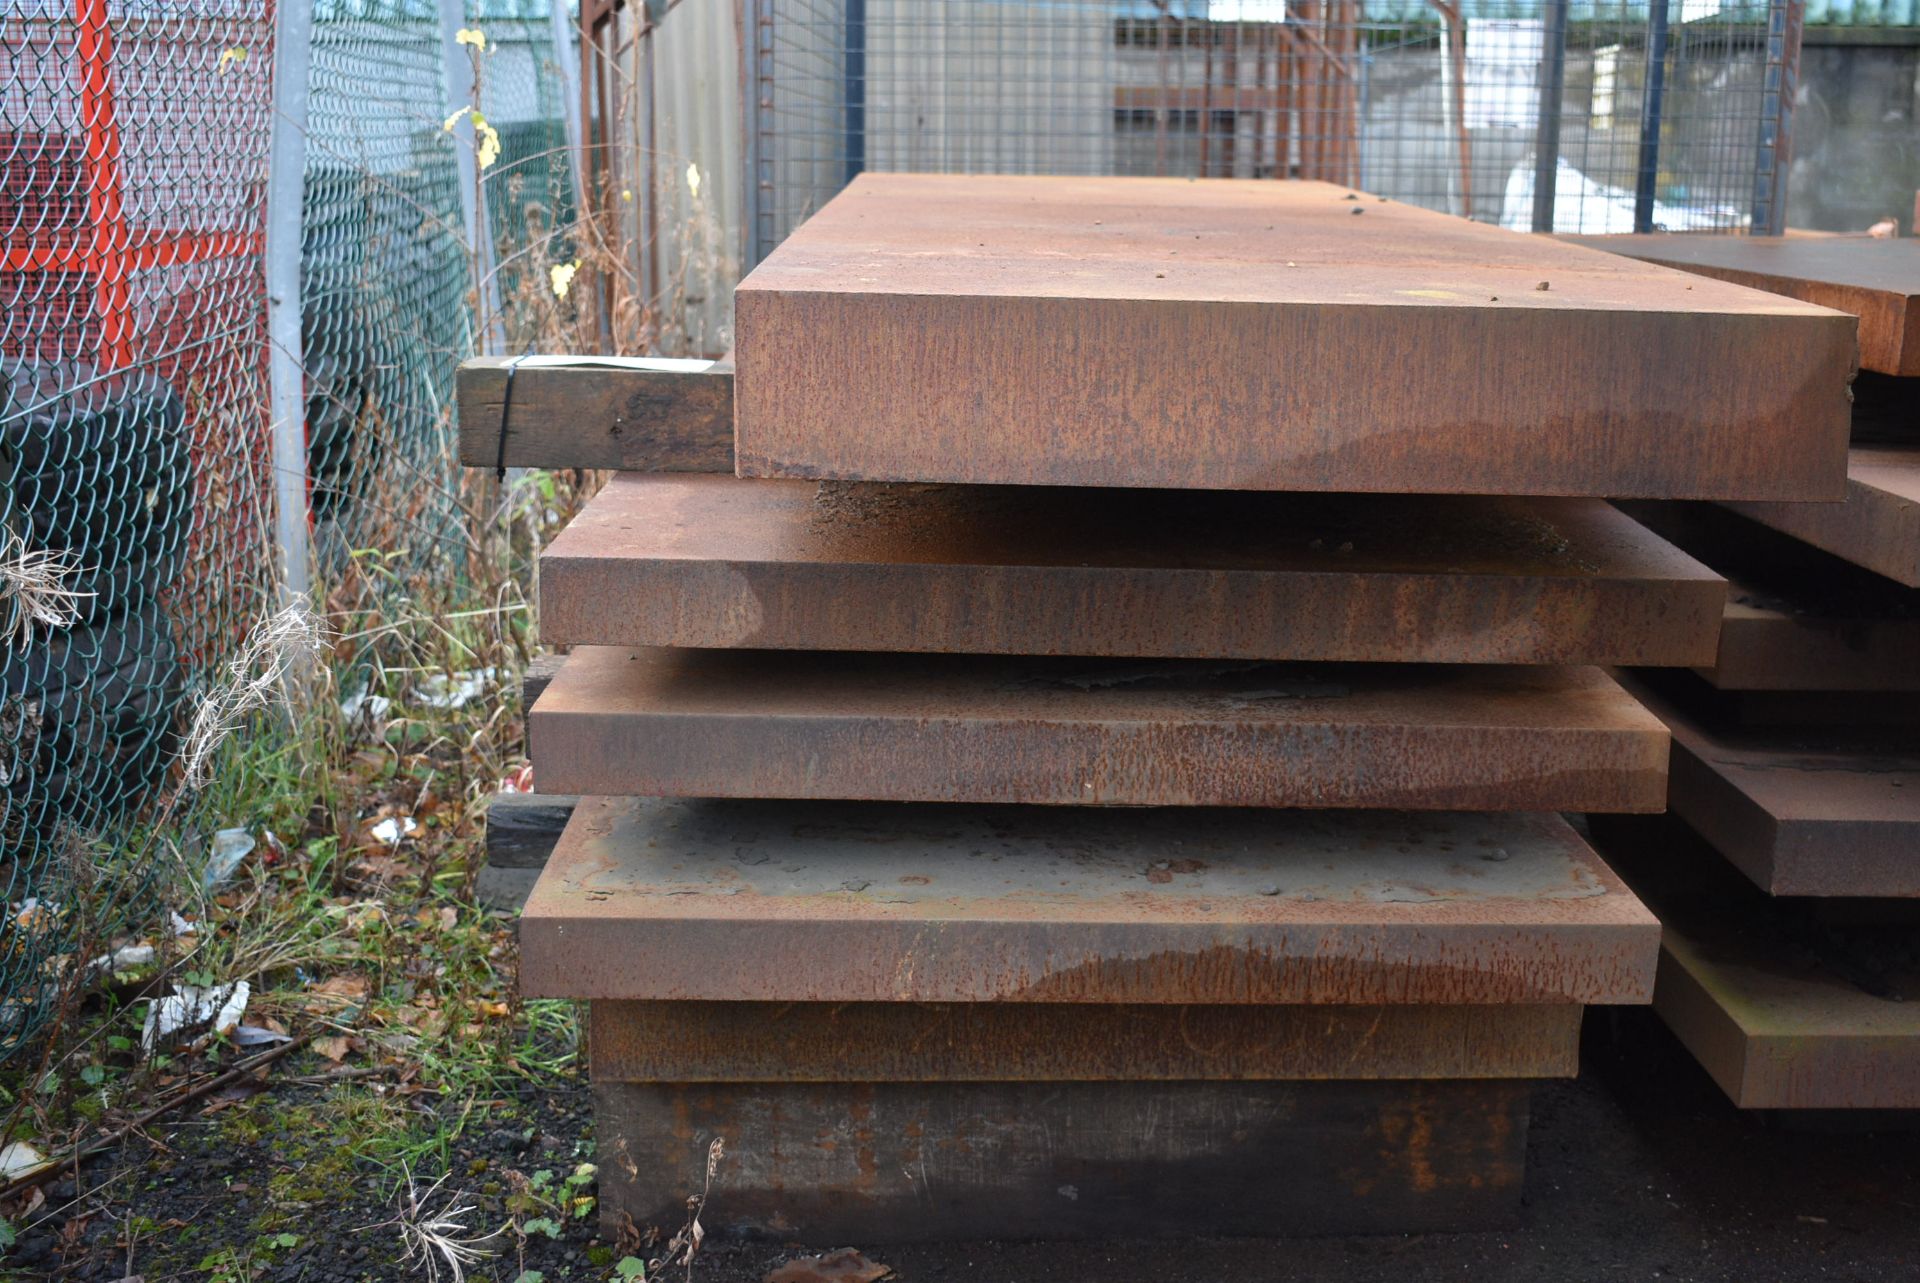 Five Assorted Steel Plates, up to approx. 2.5m x 8